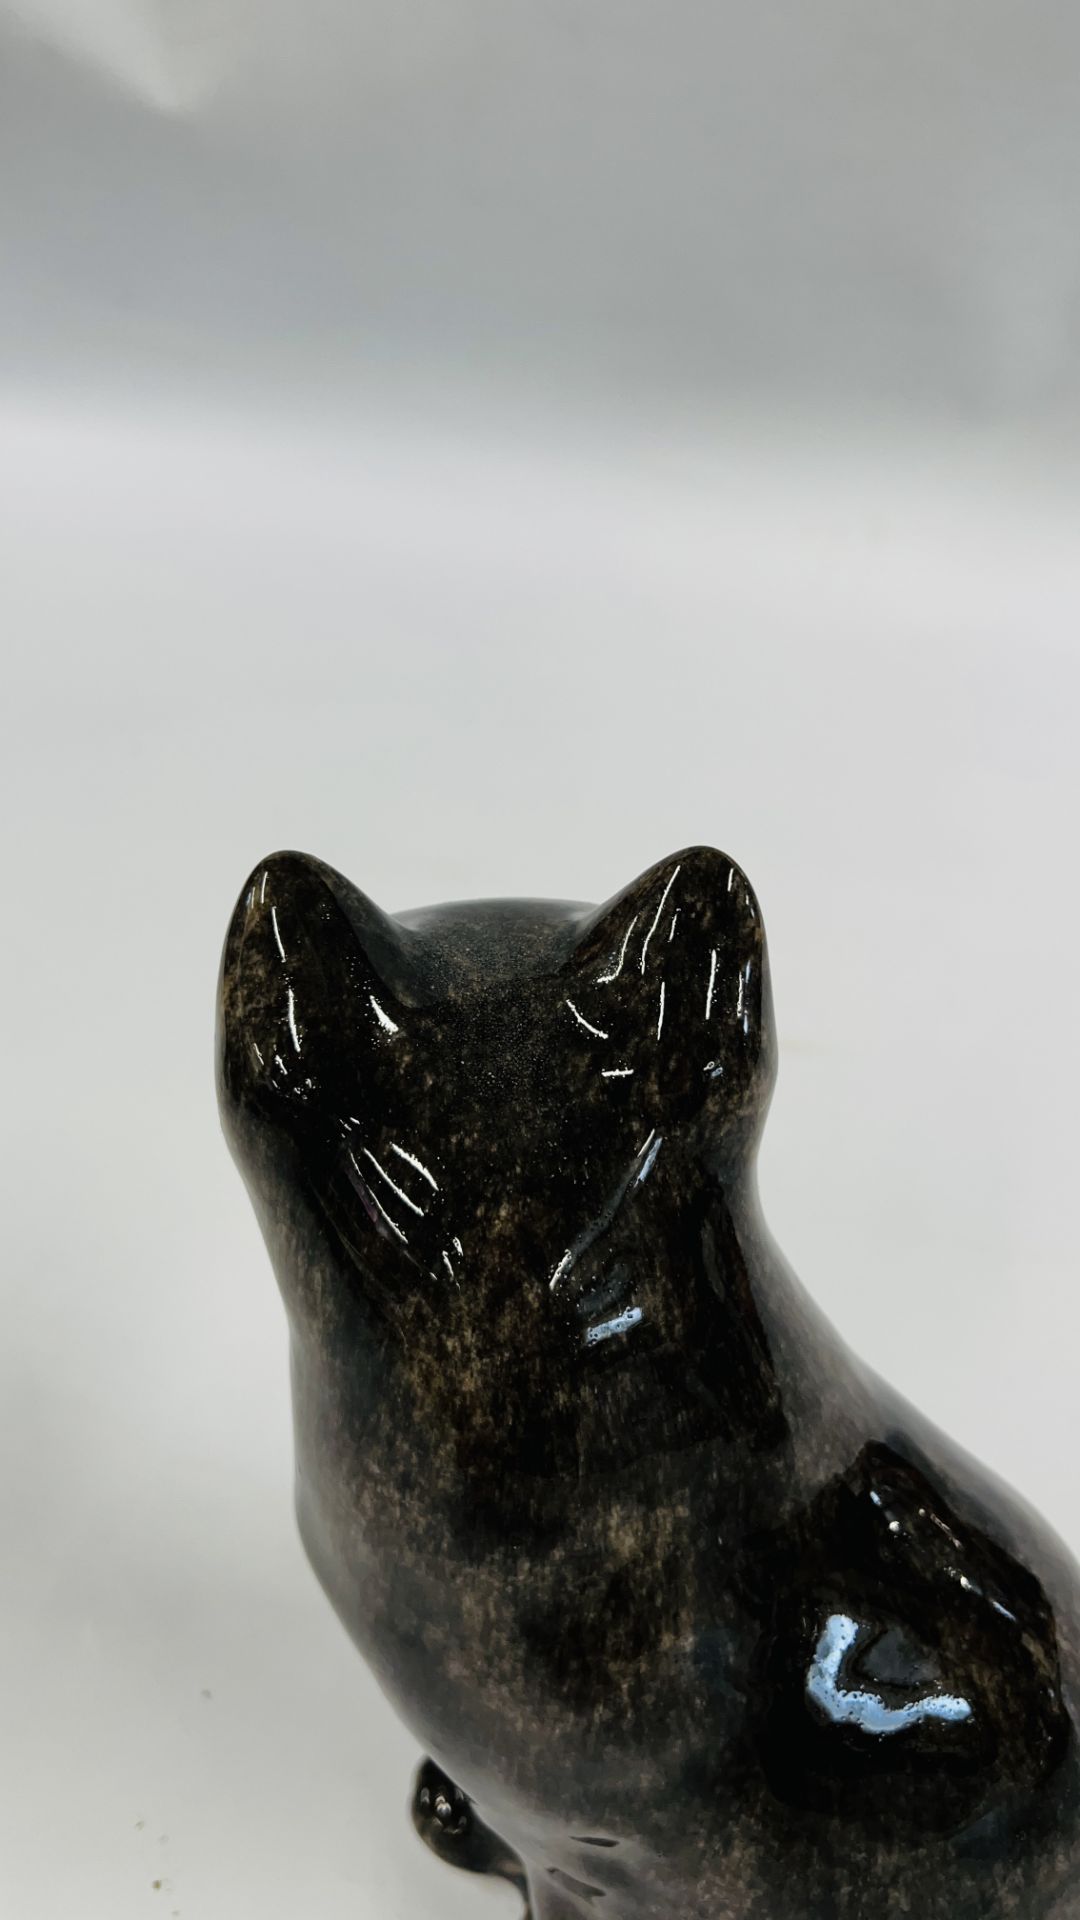 A HANDCRAFTED WINSTANLEY NO.4 SEATED CAT FIGURE - HEIGHT 24CM. - Image 5 of 6